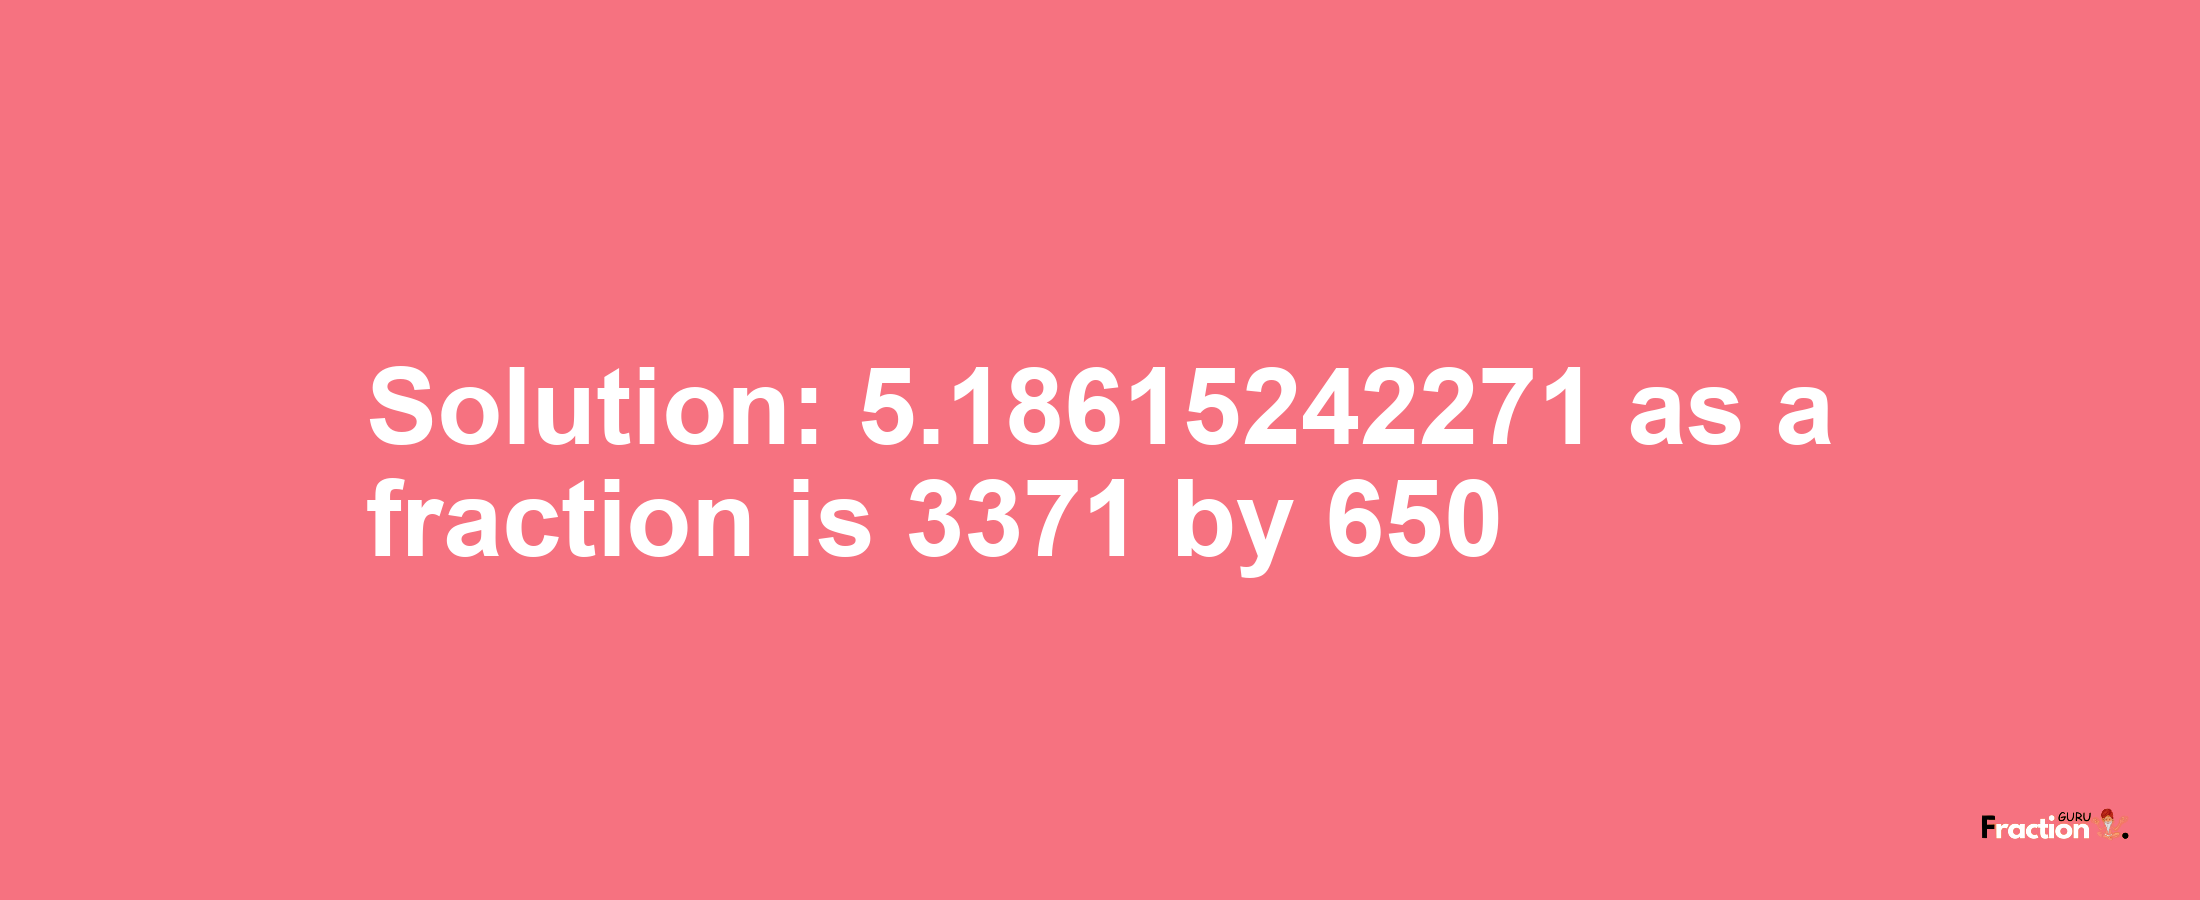 Solution:5.18615242271 as a fraction is 3371/650